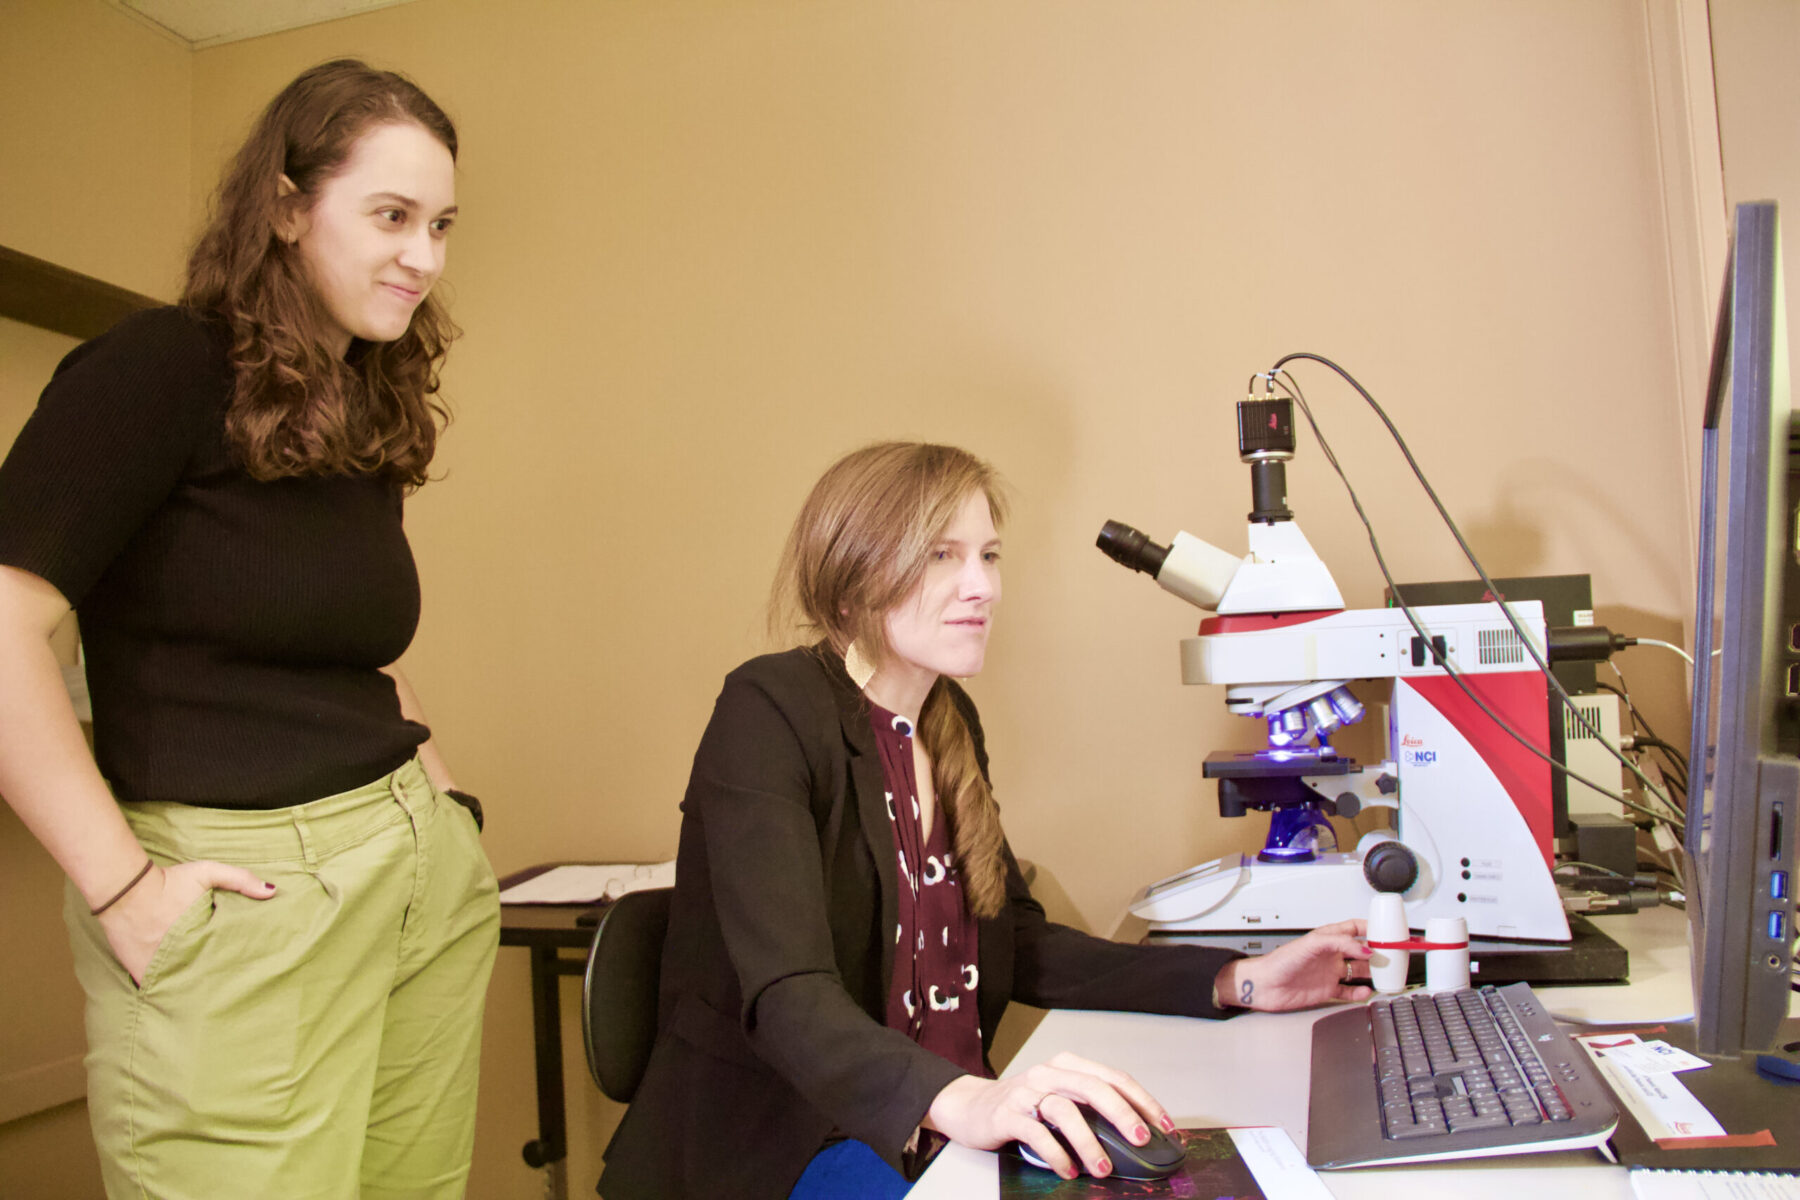 Professor Sydney Trask sits at her digital microscope while graduate student Erisa Met Hoxha stands and observes.